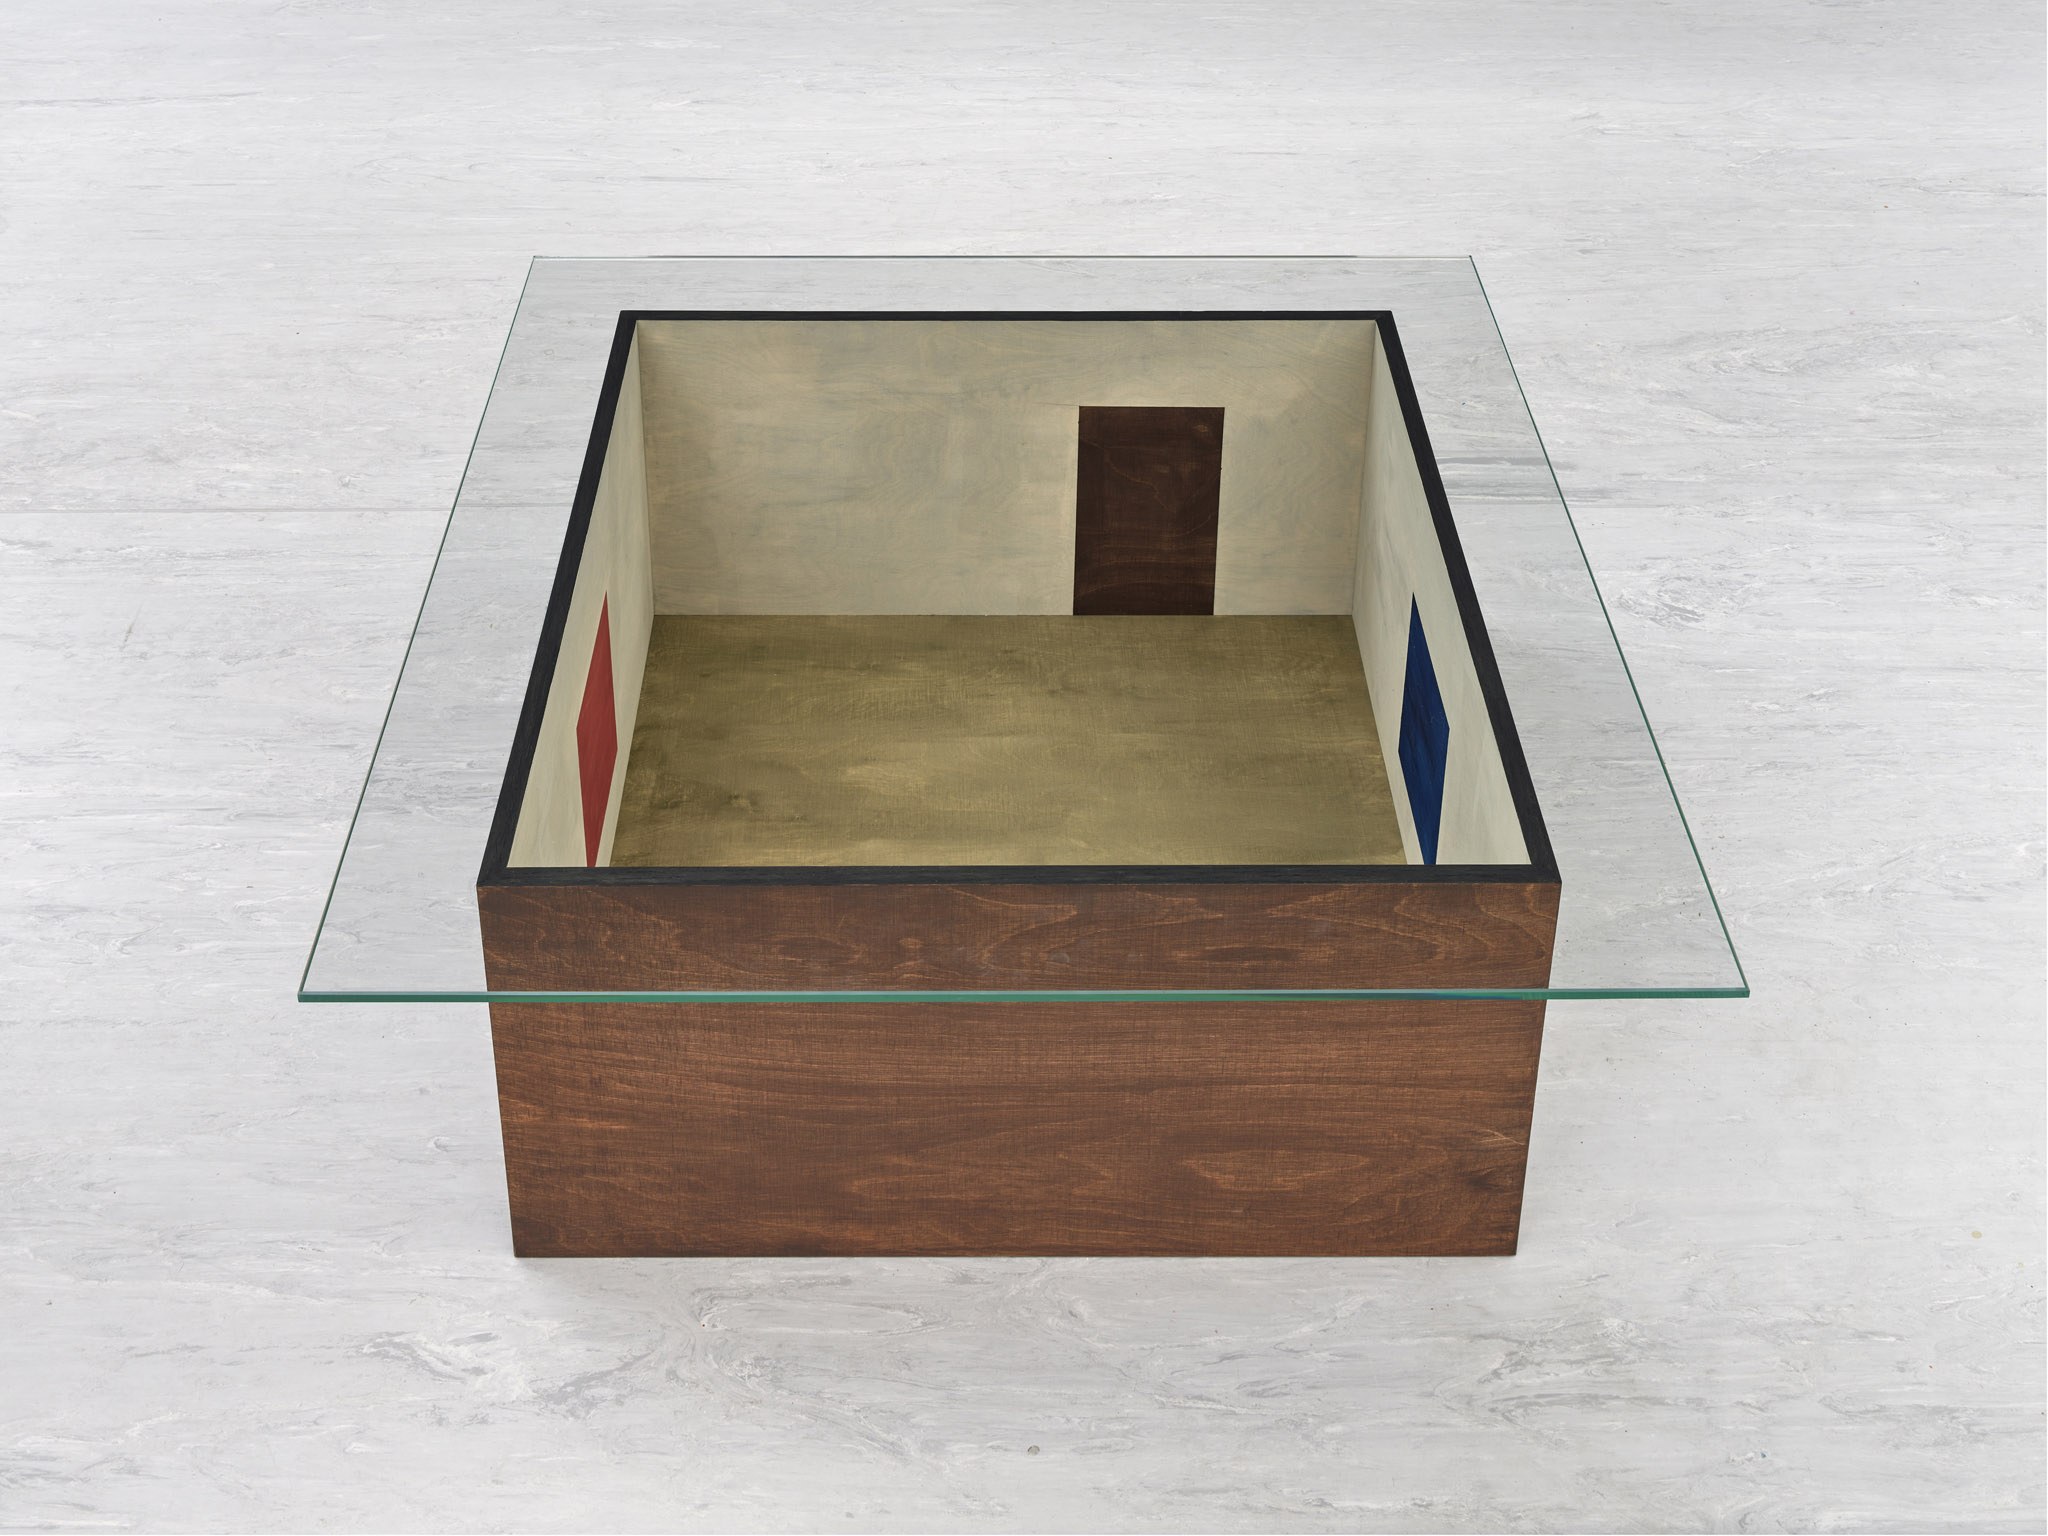 Sunah Choi, "Table (Room with two paintings on the wall)", 2023, wood, color, glass, 80 x 31 x 80 cm